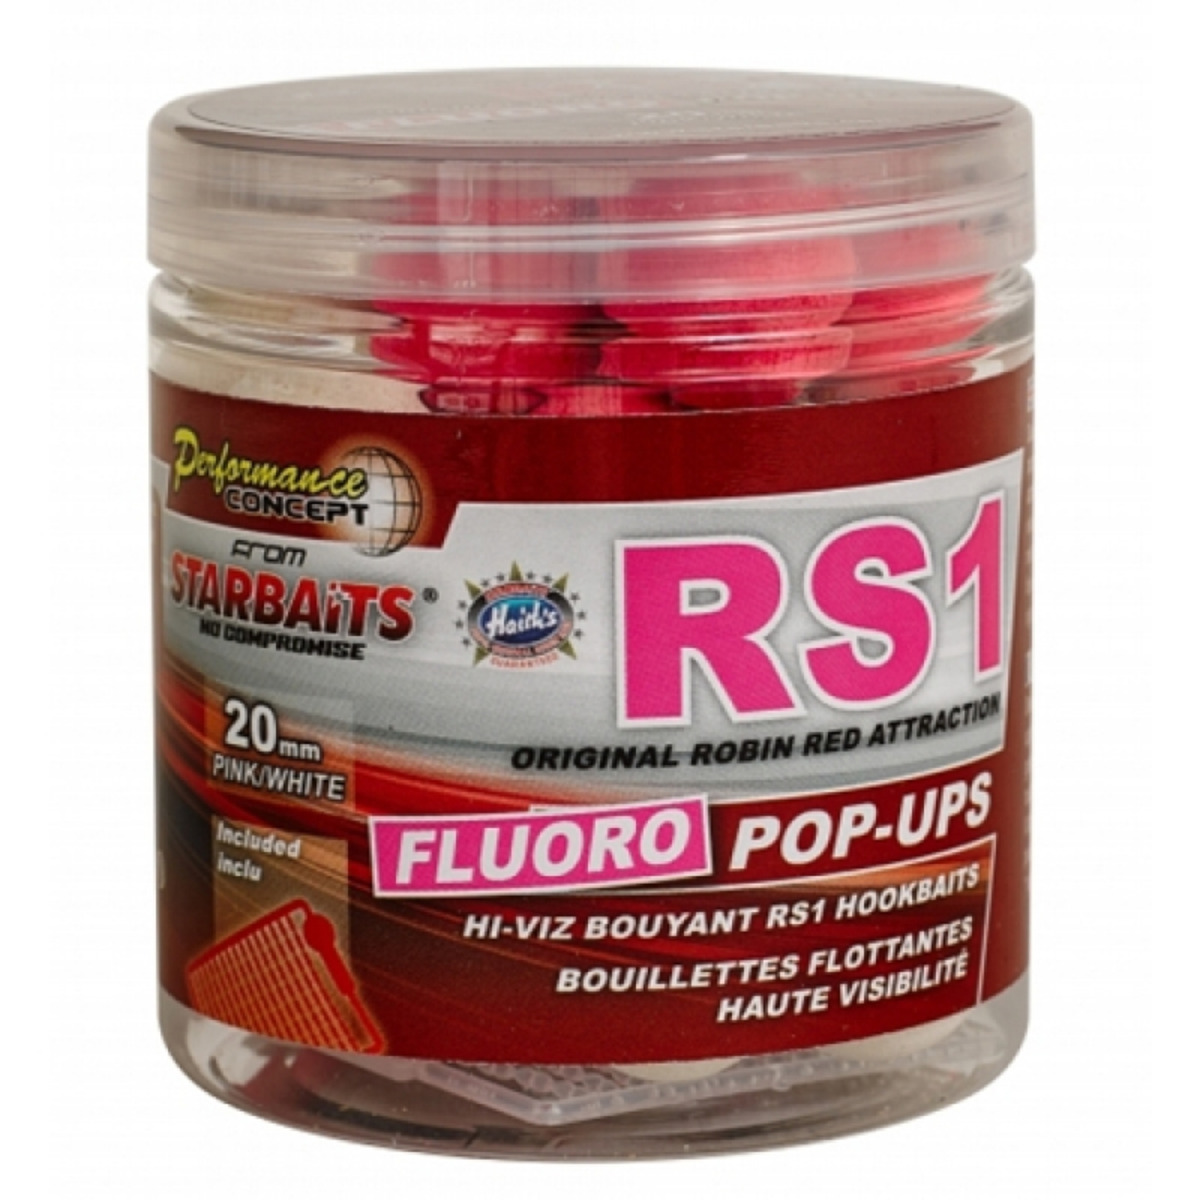 Starbaits Concept Fluo Pop Ups Rs1 - 20 mm  - 80 g